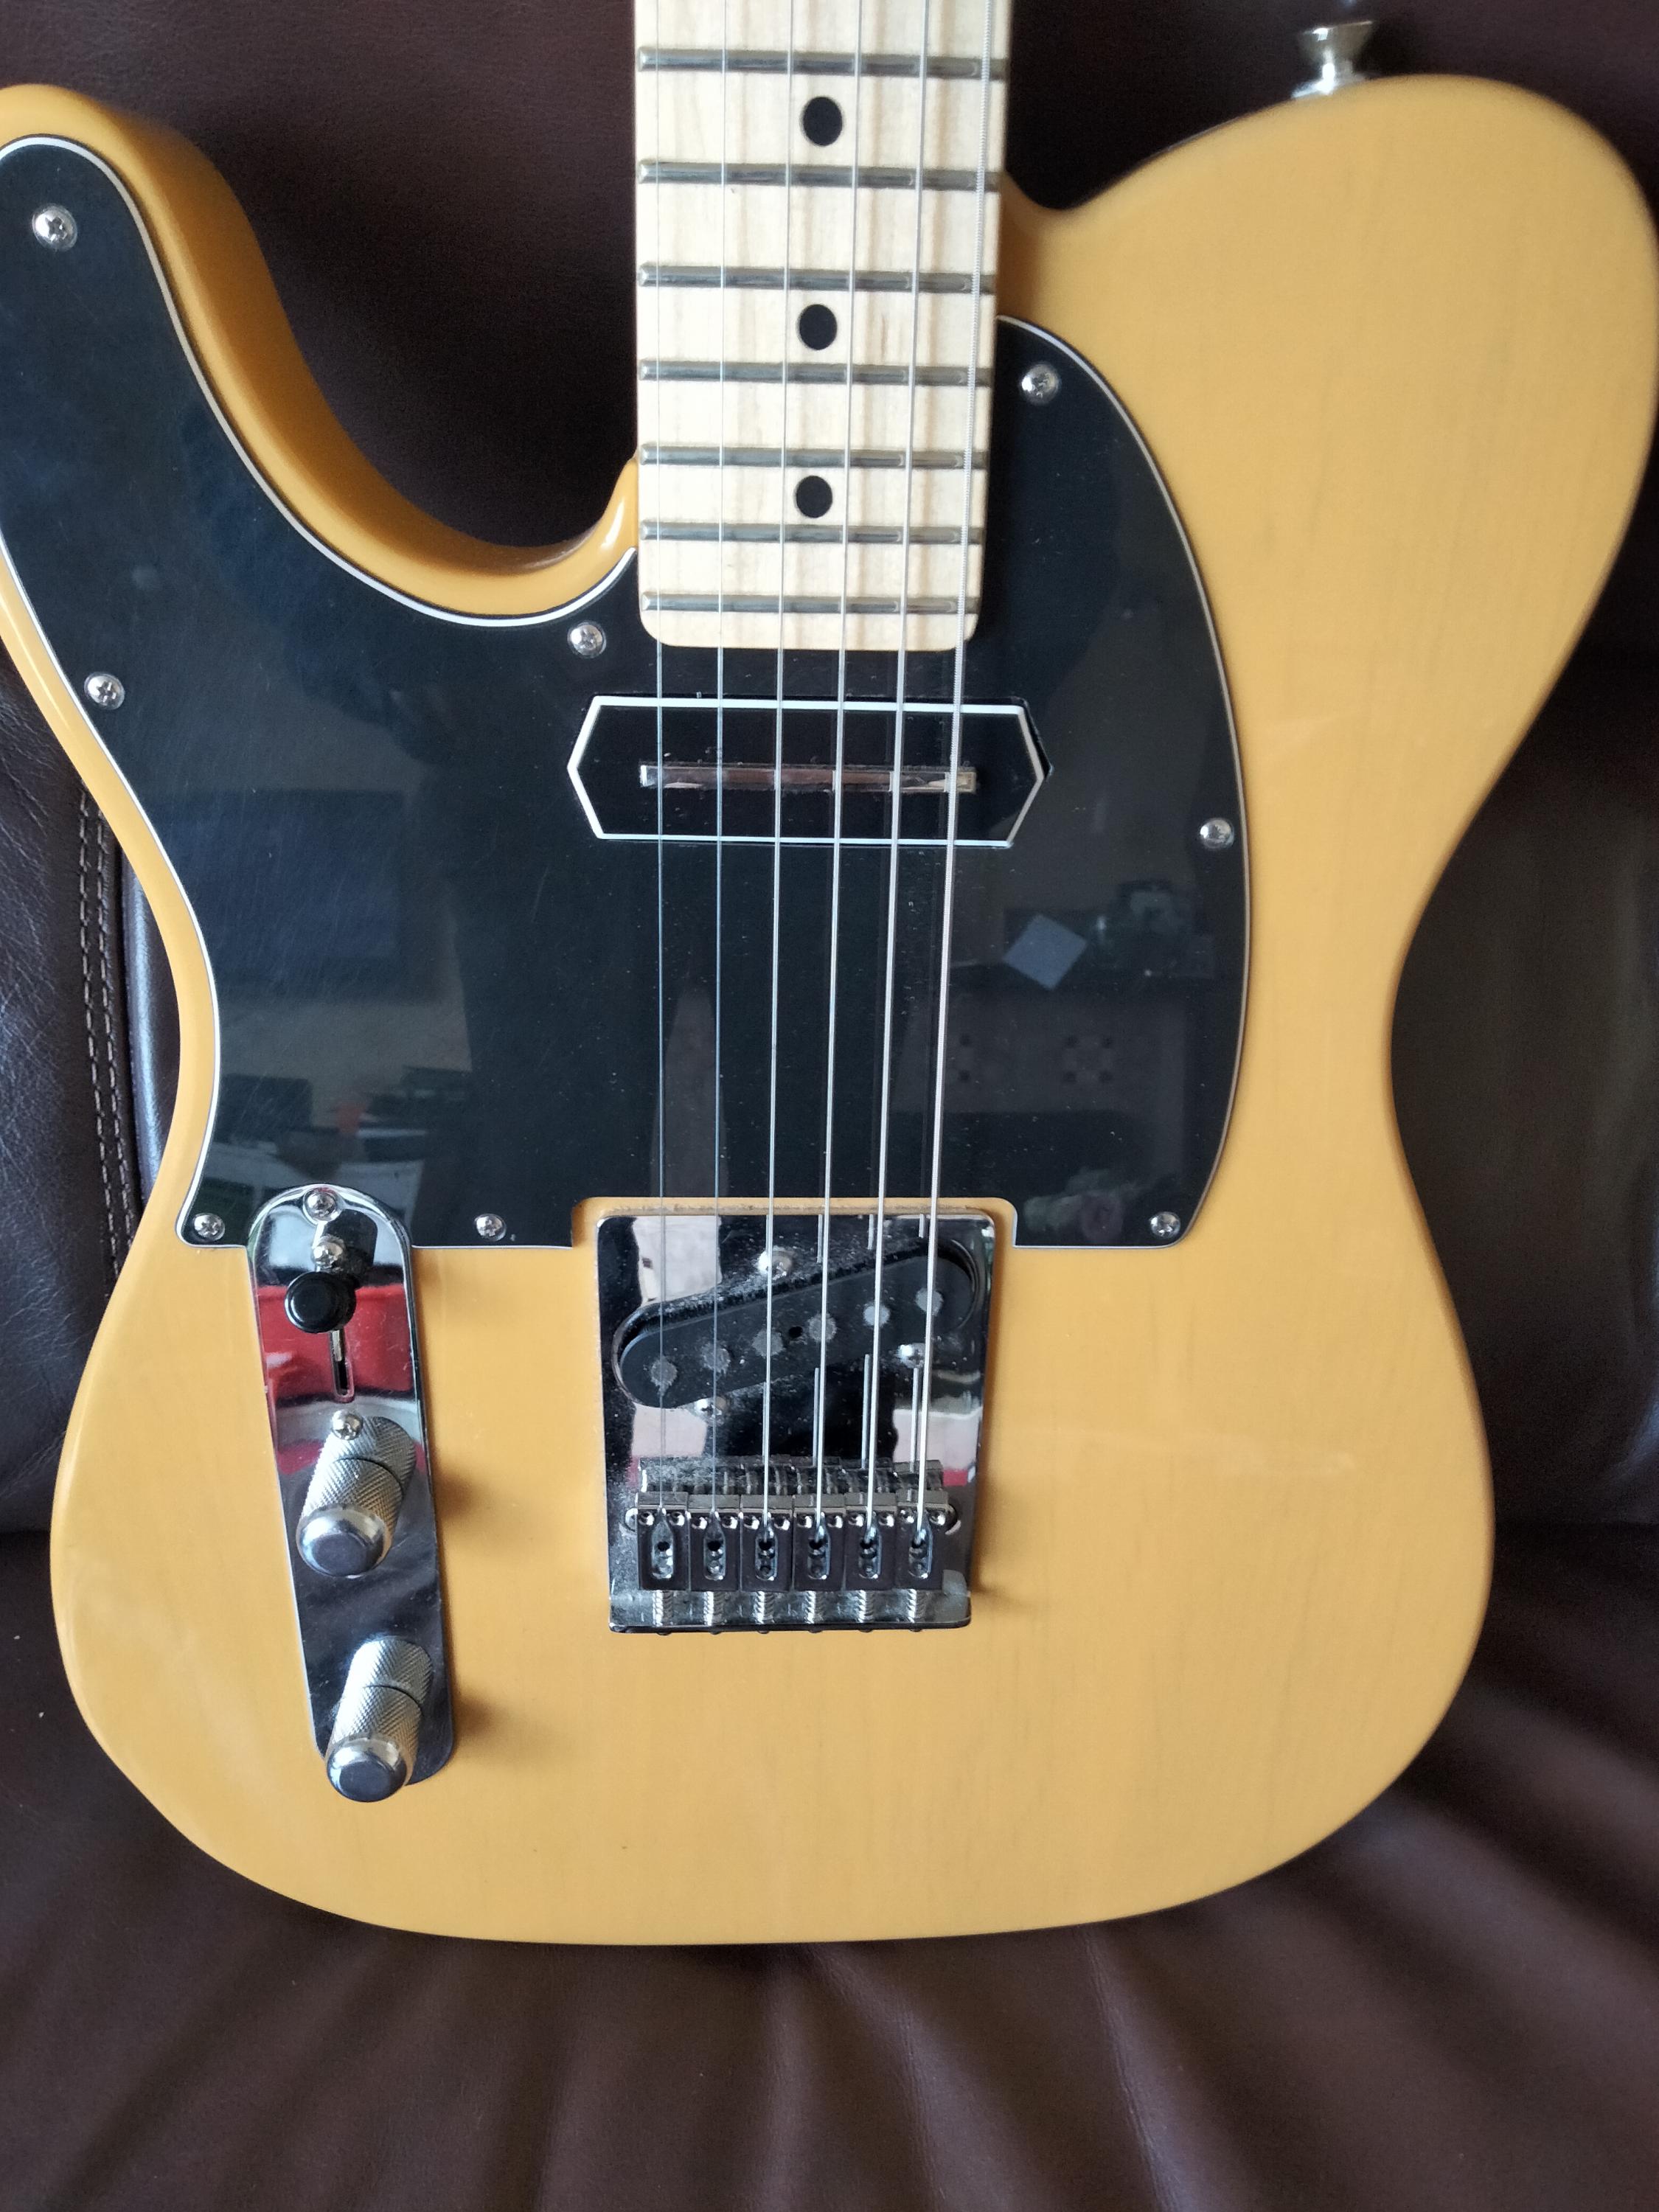 Telecaster Love Thread, No Archtops Allowed-img20220331153102-jpg